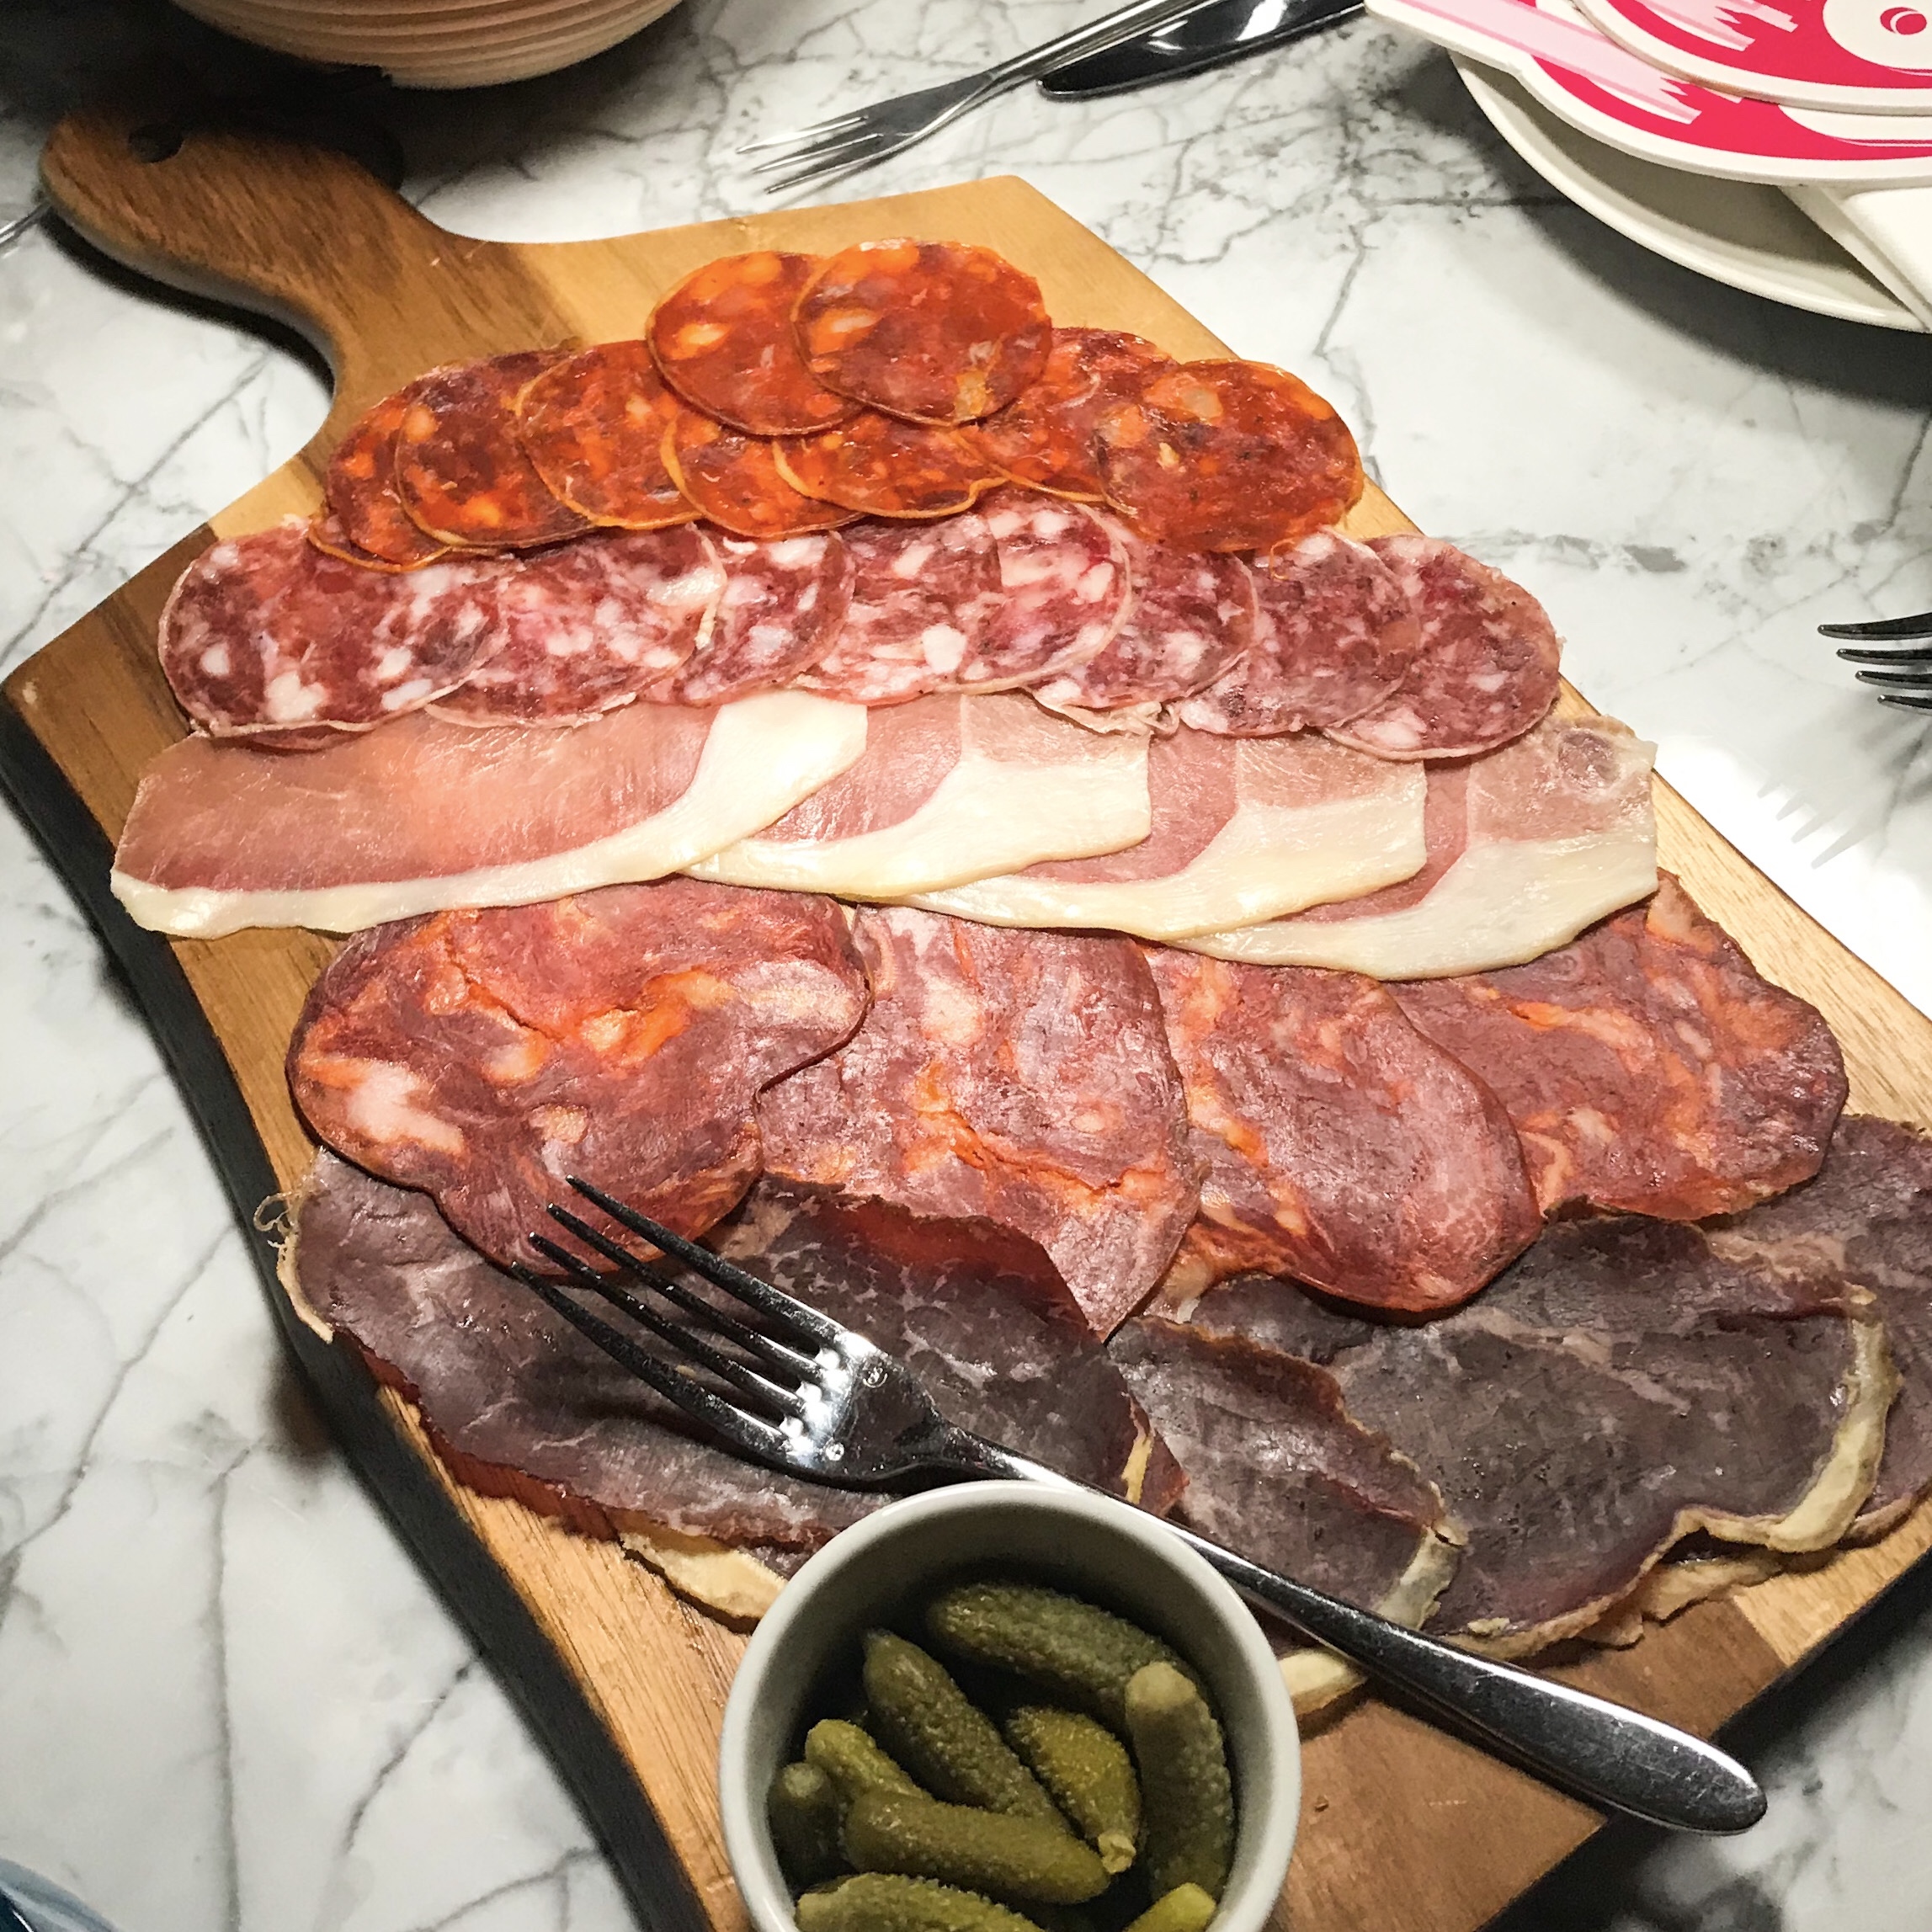 Charcuterie board that comes with the fondue at 28-50 Covent Garden